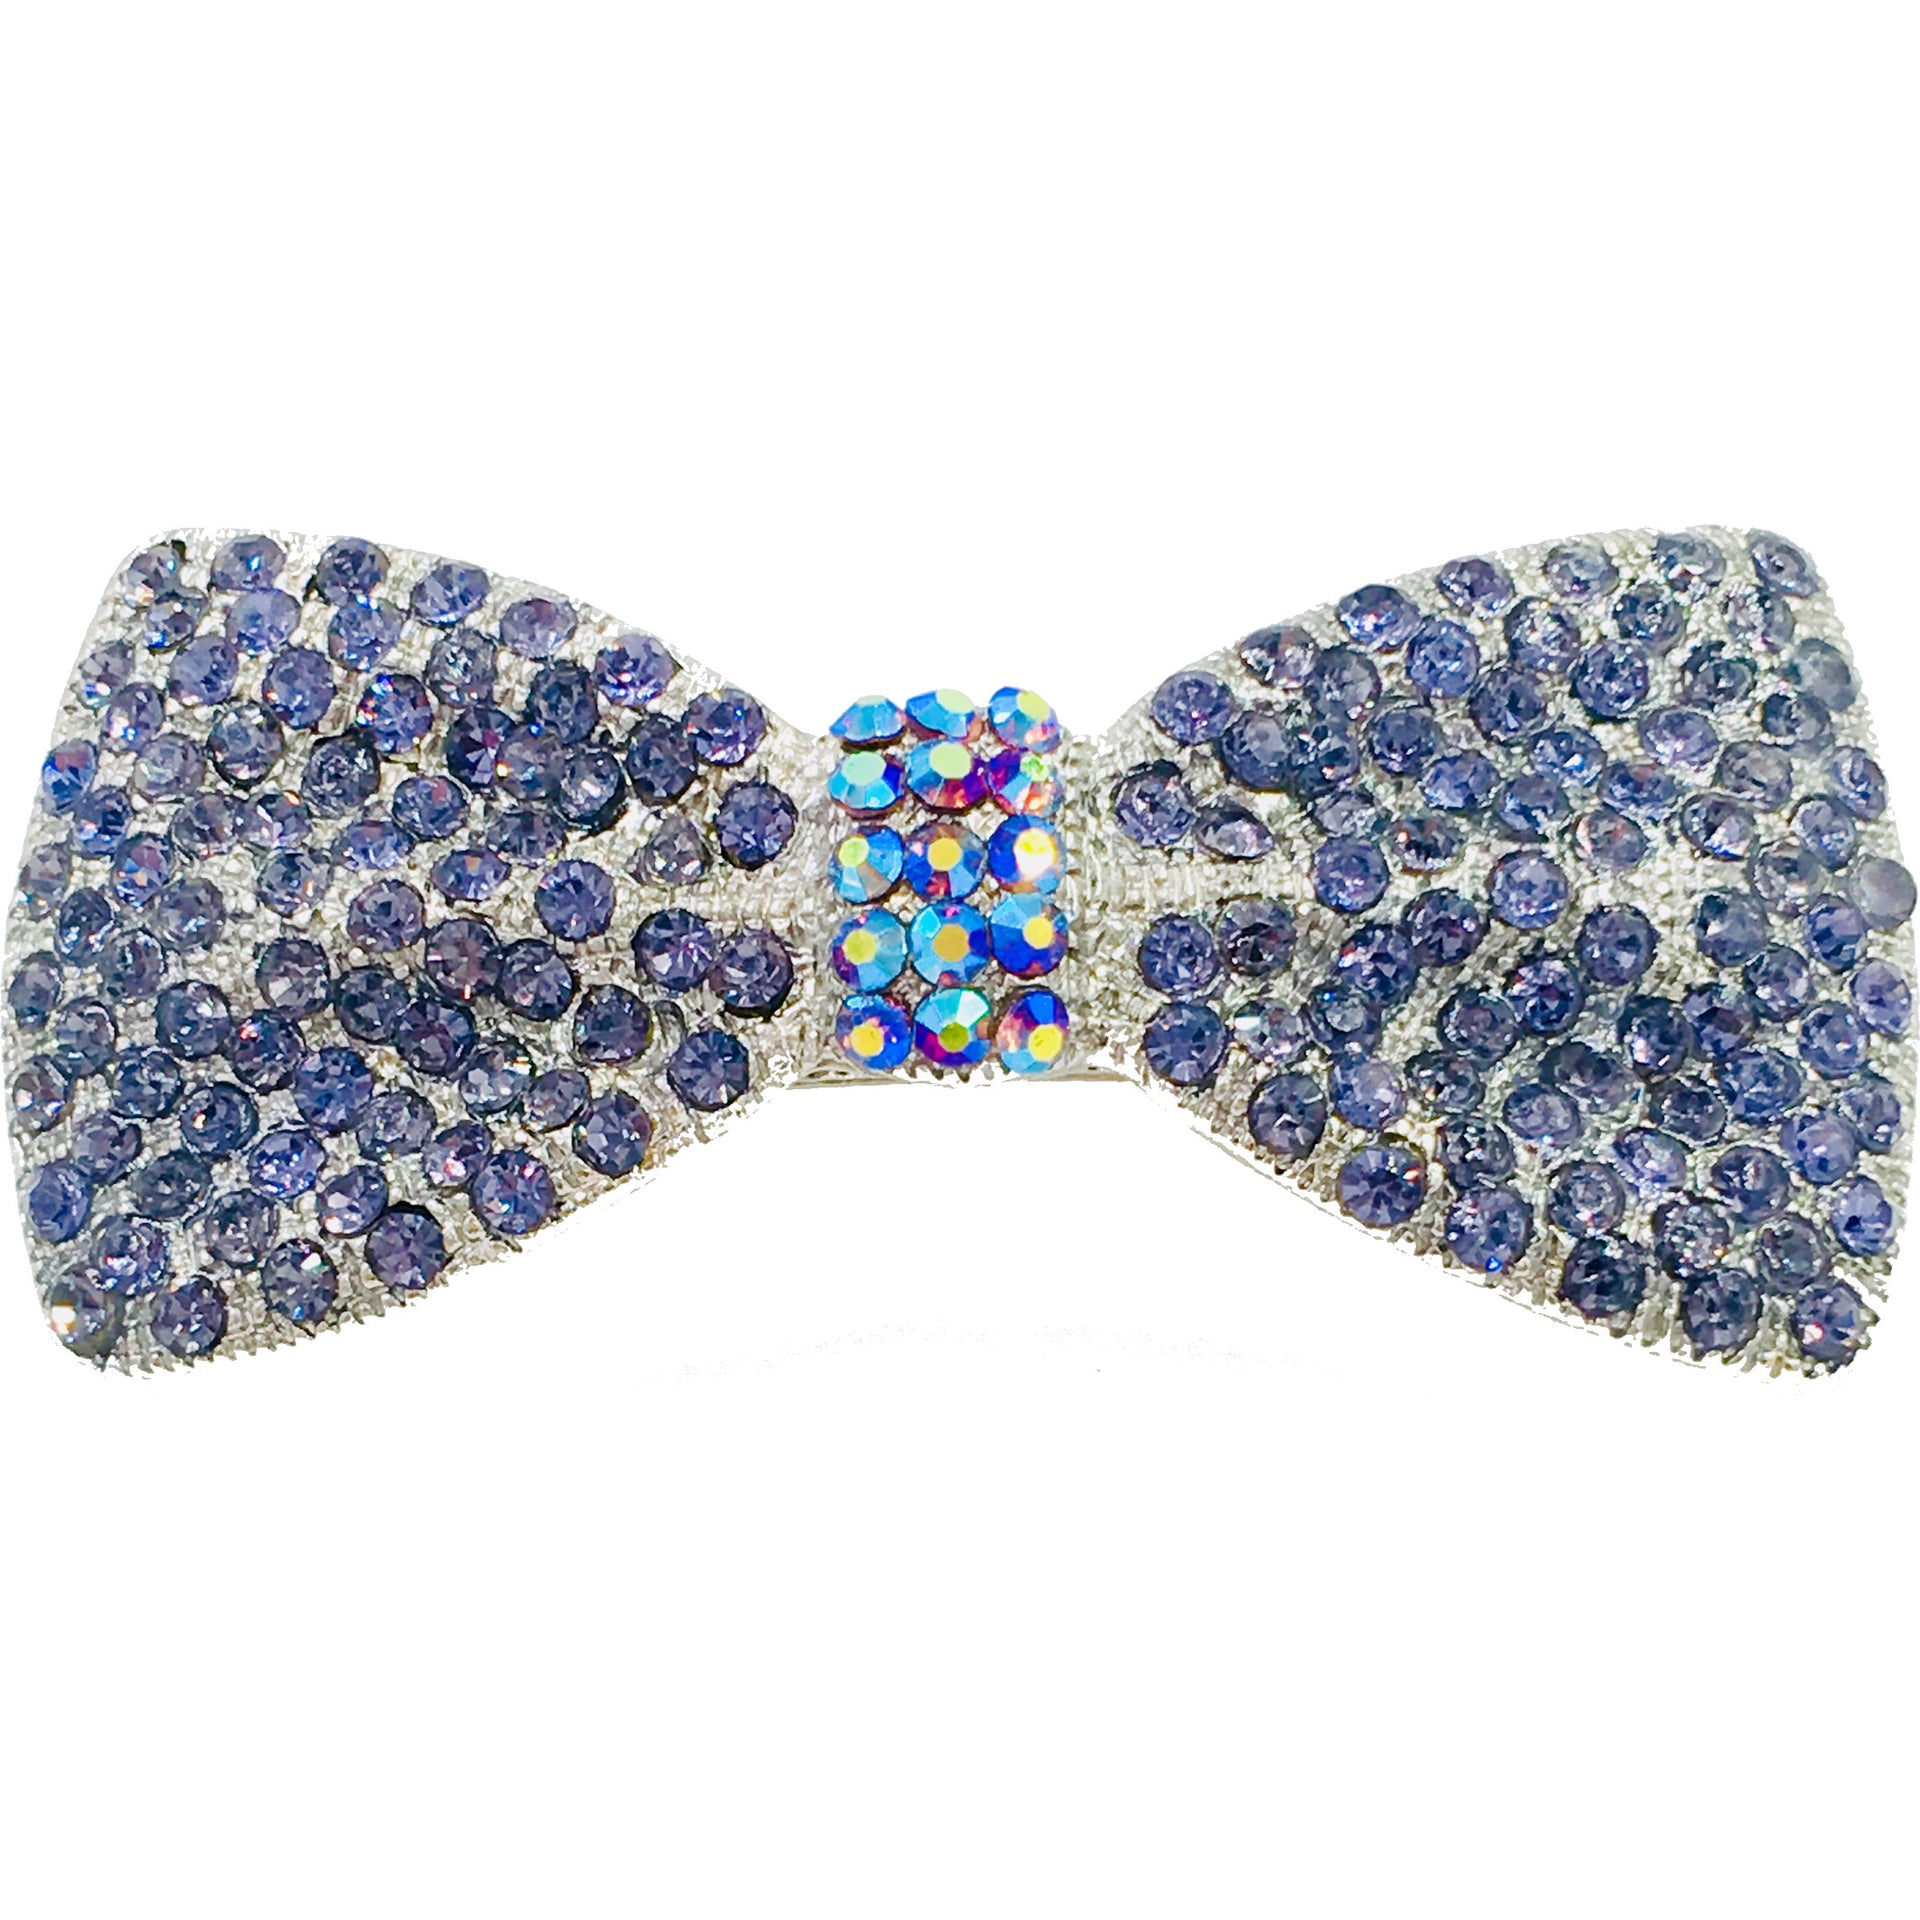 Bow Tie Barrette use Rhinestone Crystal silver base Pink Red Purple Blue Green Brown Clear AB, Barrette - MOGHANT